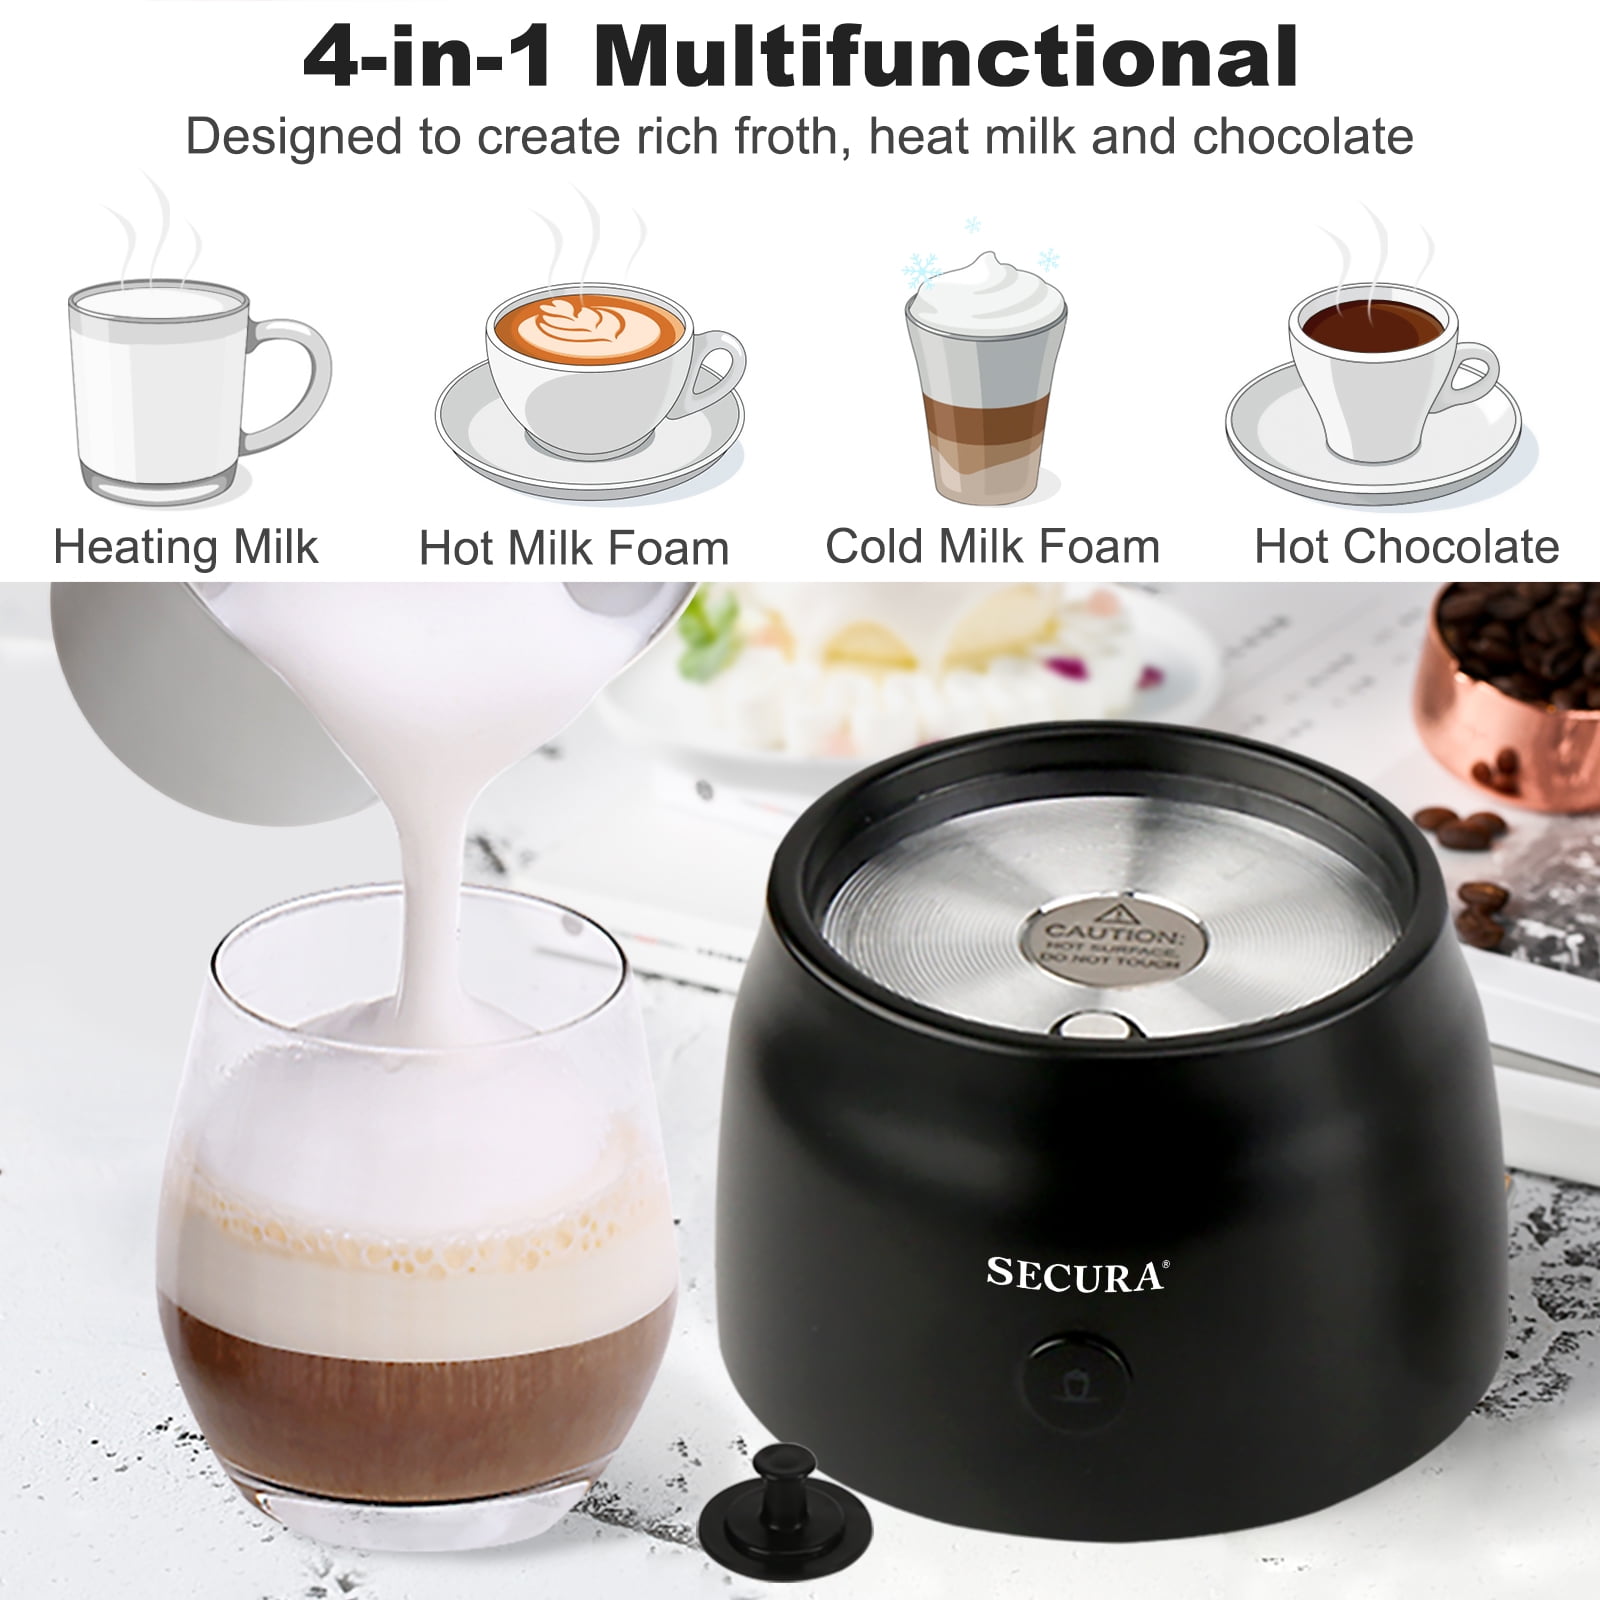 Secura Electric Milk Frother, Automatic Milk Steamer, 4-IN-1 Hot